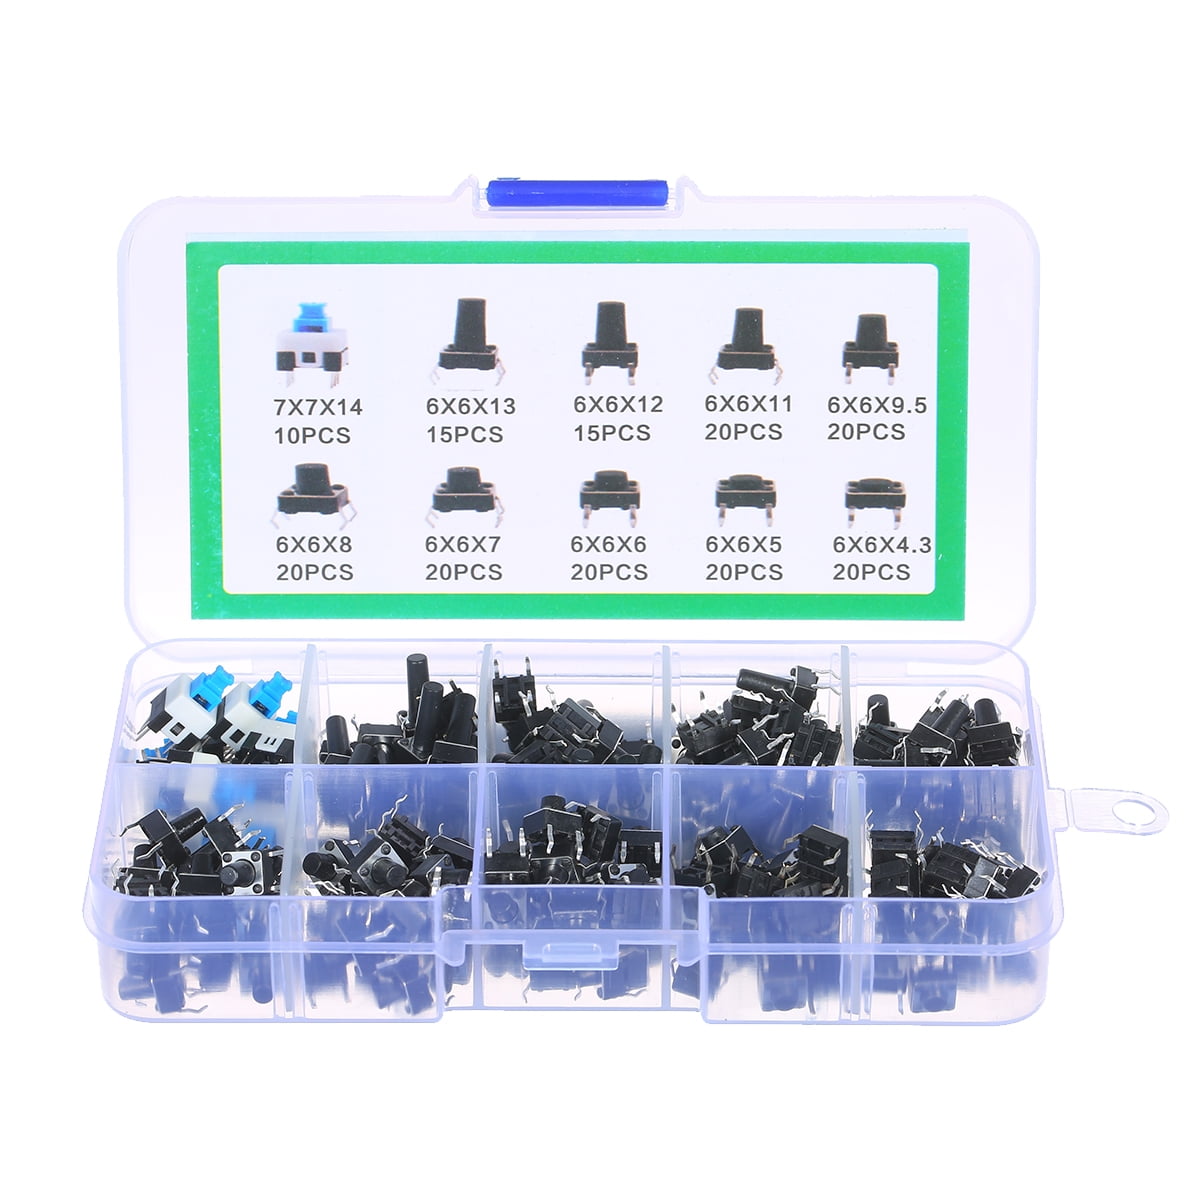 50pcs Tactile Switch Touch Push Button Key Tact Cooker 6 x 6 x 4.3 mm 4-pin DIP 